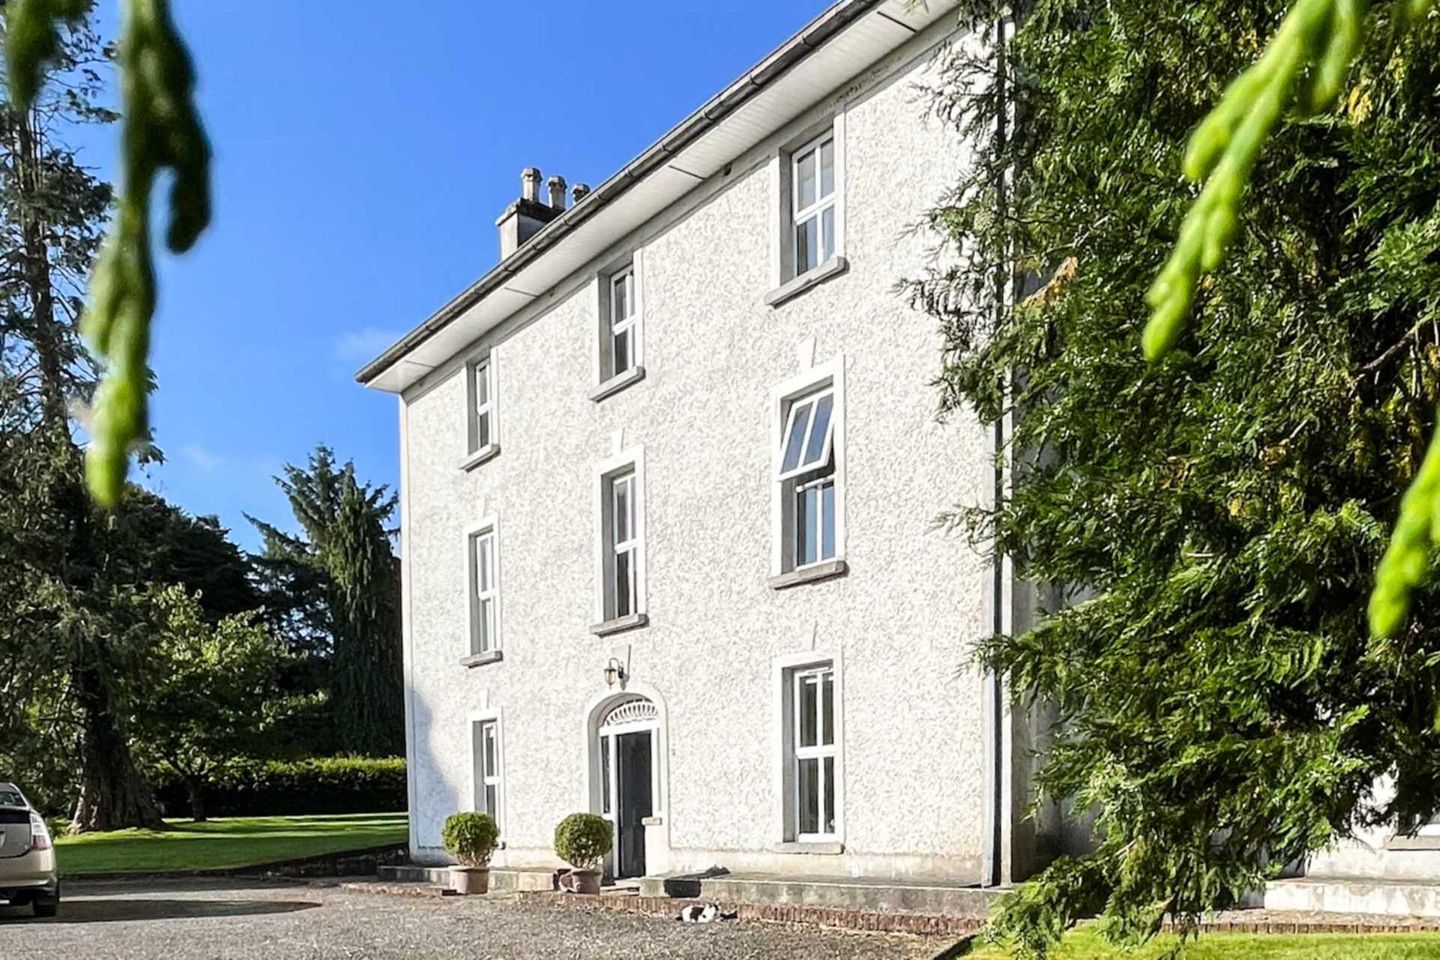 Larch Vale House, Larch Vale, Moneygall, Co. Offaly, E53F992